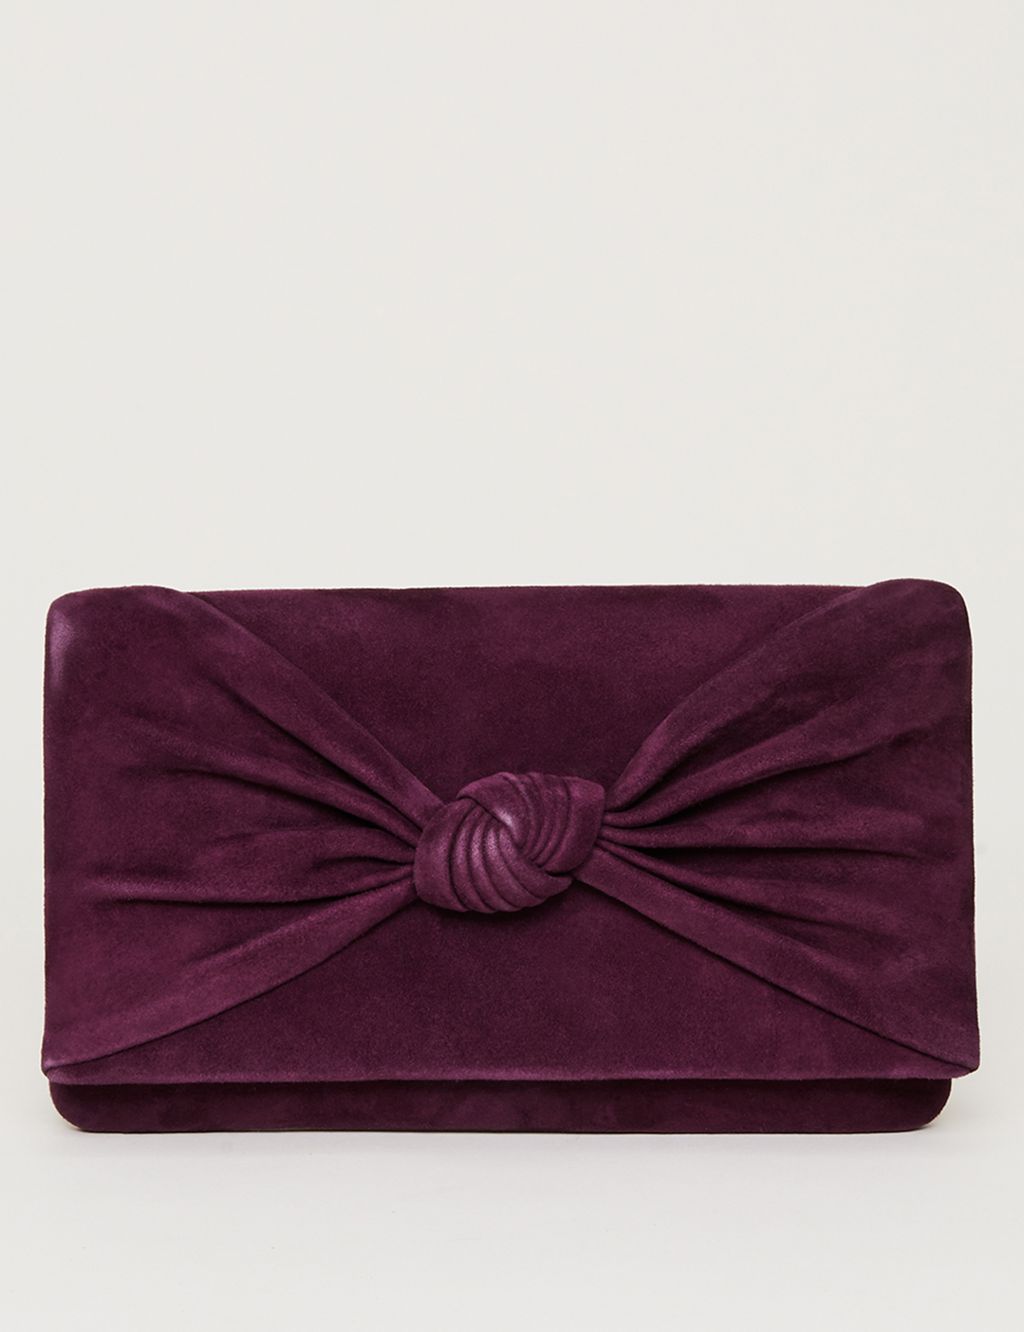 Leather Knot Front Clutch Bag image 1